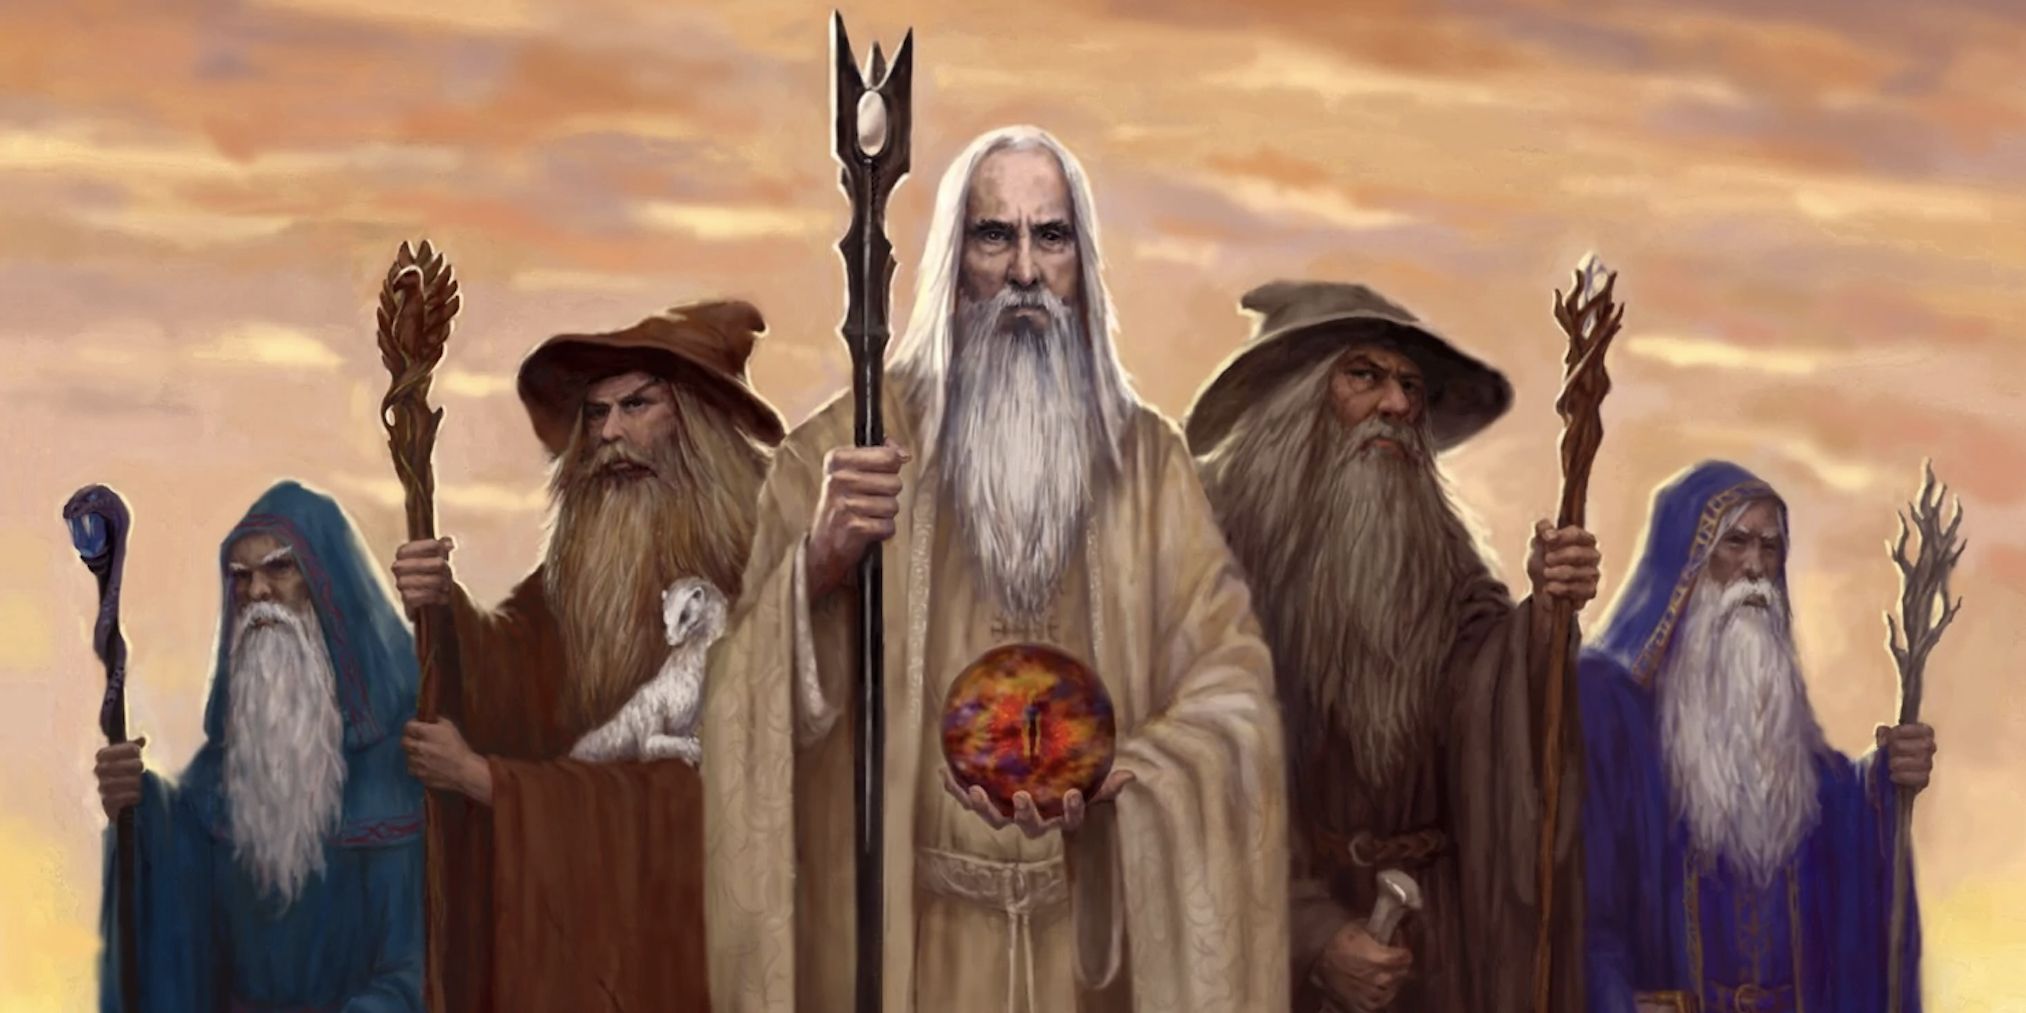 lotr-wizards-rings-lord